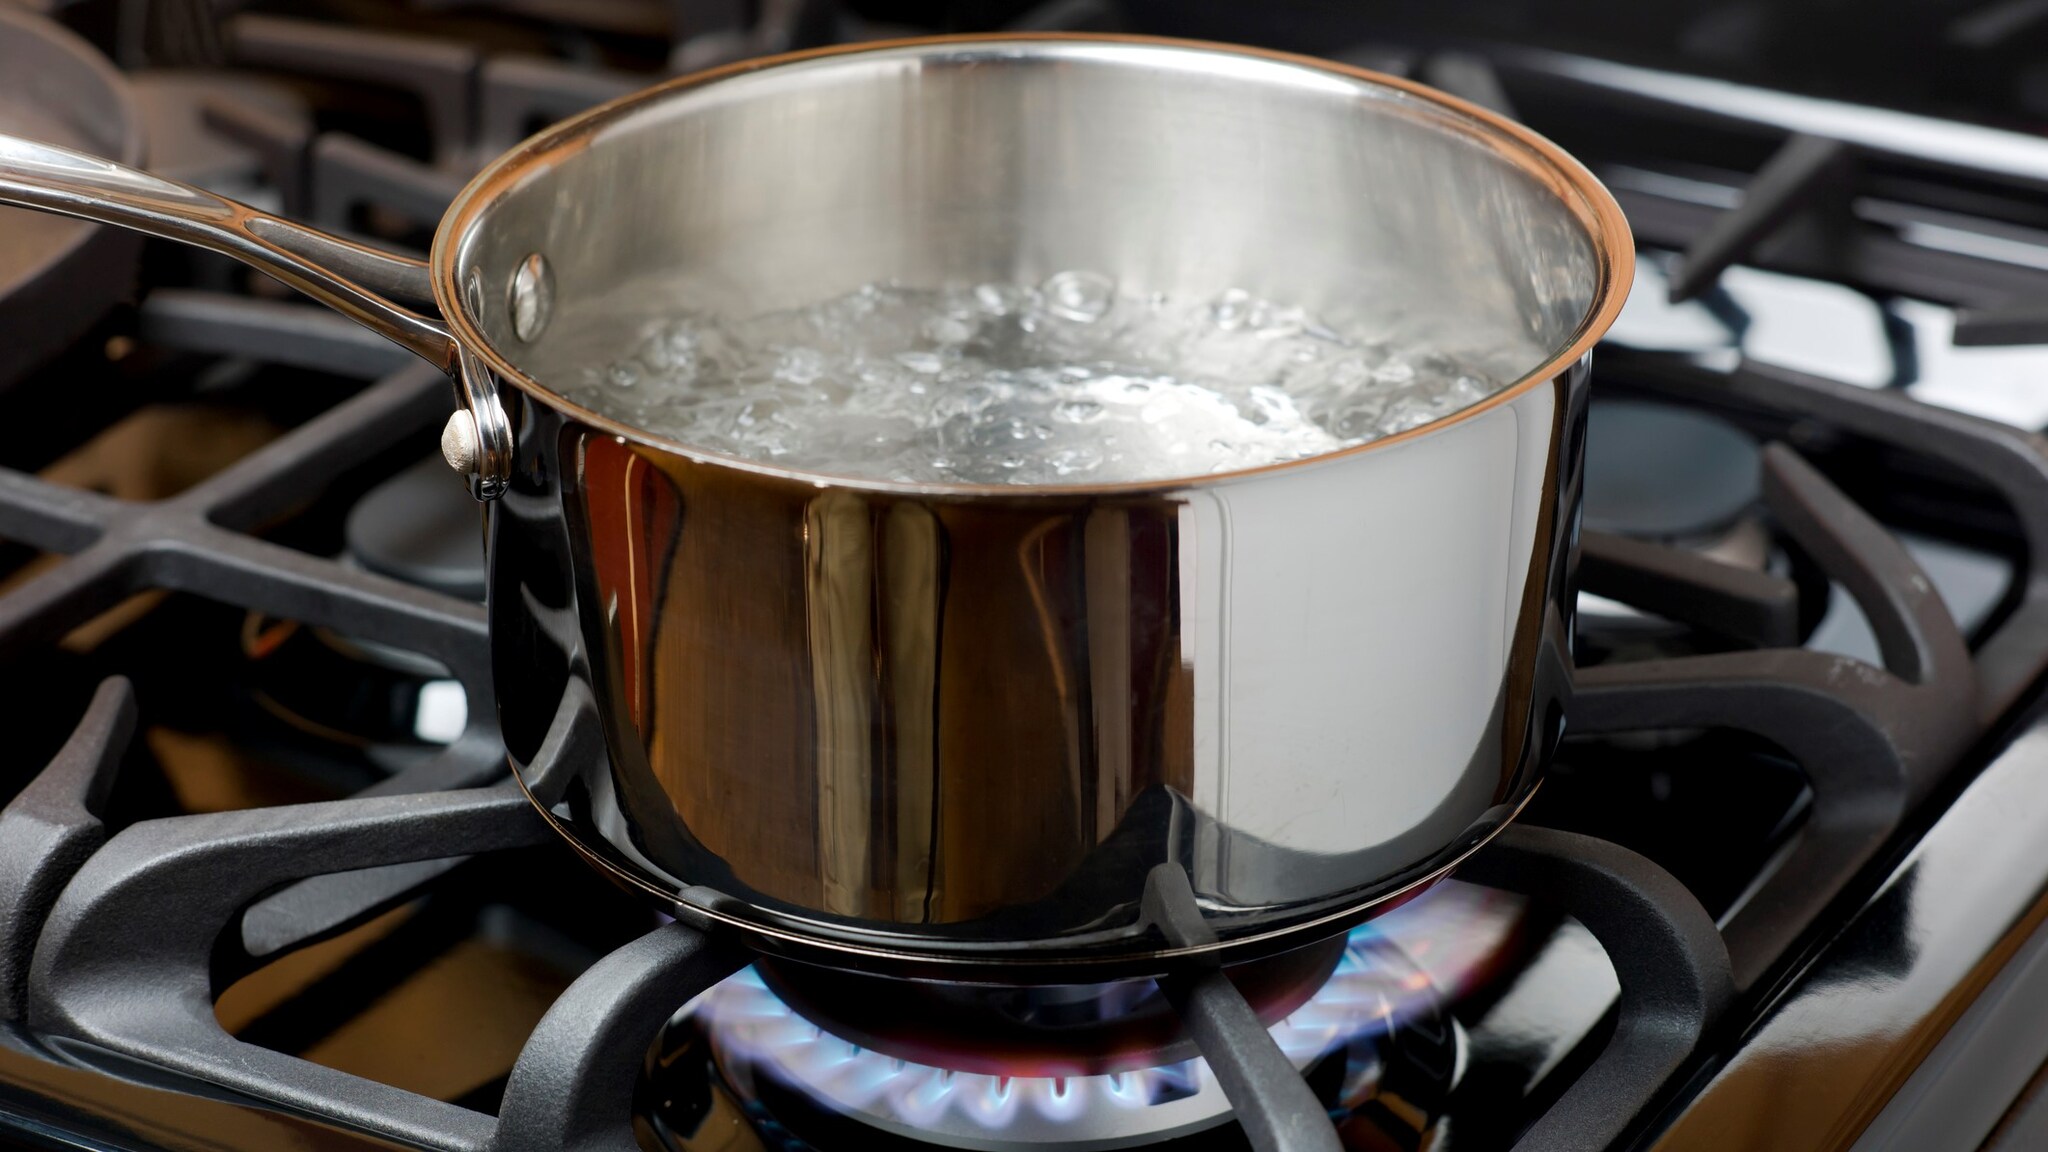 Boiling water in a pan being heated on a stove.